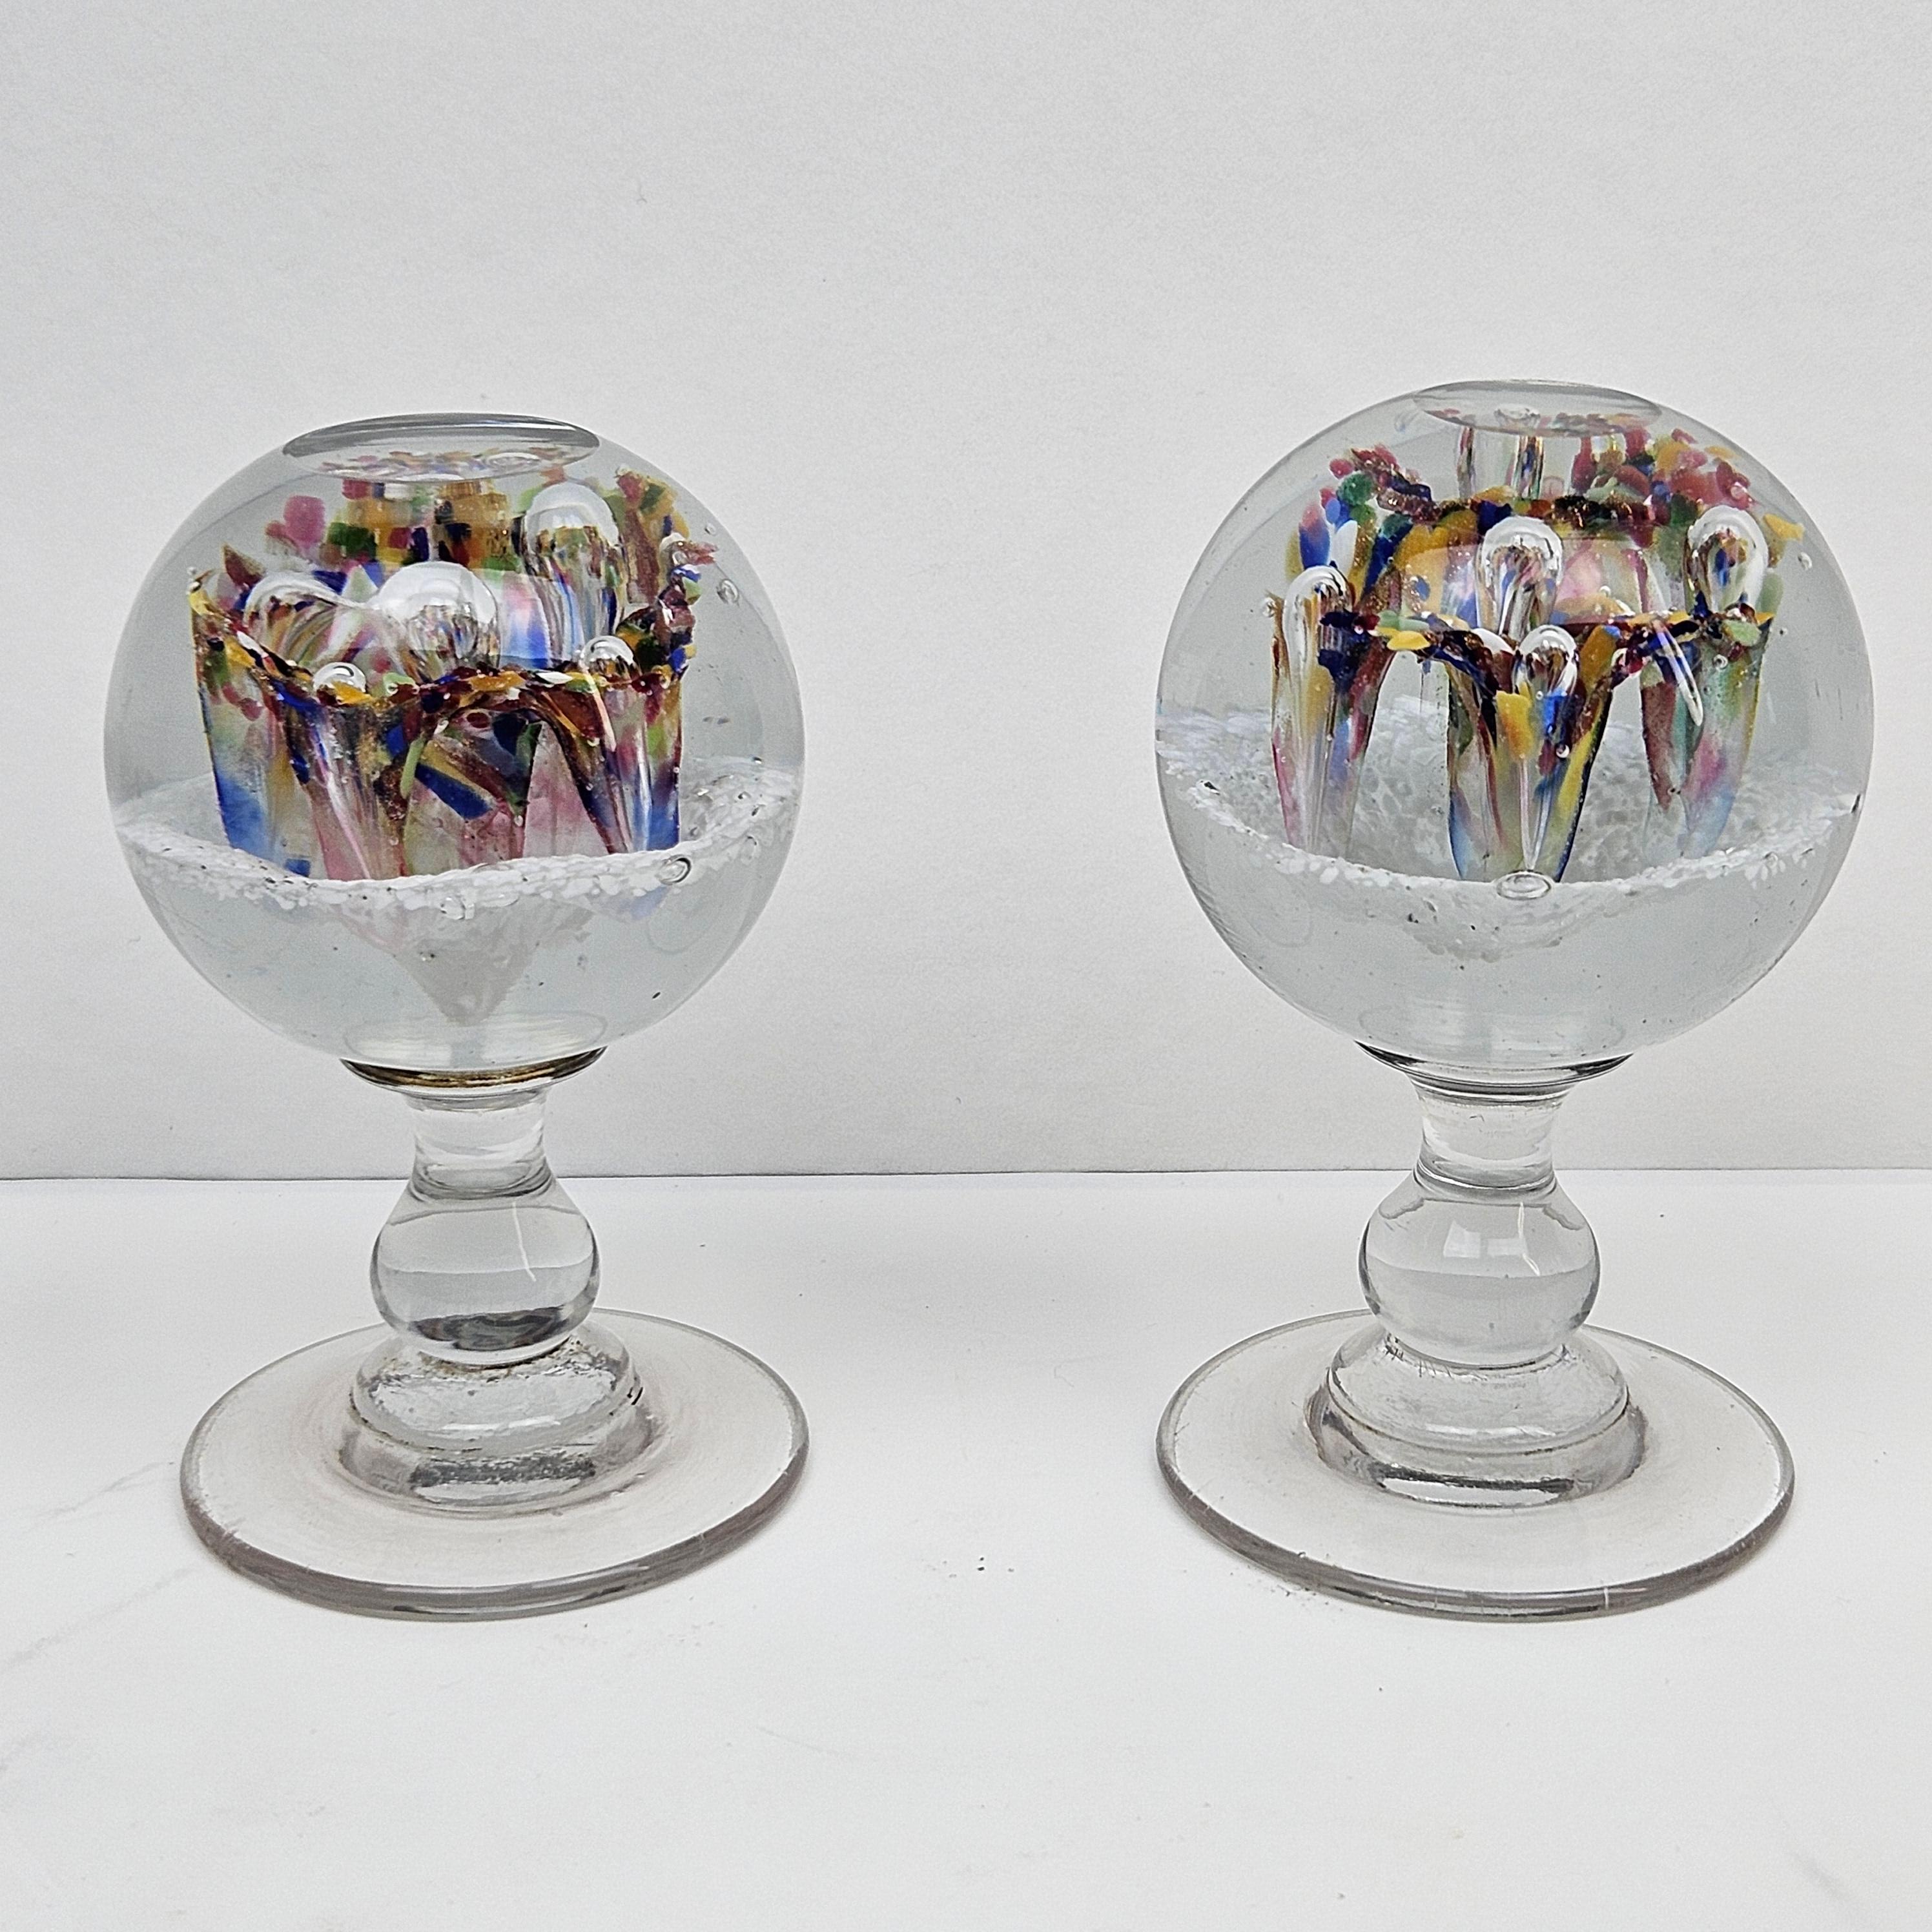 Very beautiful set of 2 glass paperweights.
This set is made in Belgium in the 19th century.

They were also used as a hat or hairpiece pedestal.
Now they are used for decoration.

These paperweights are hand blown by Belgium craftsmen in the glass